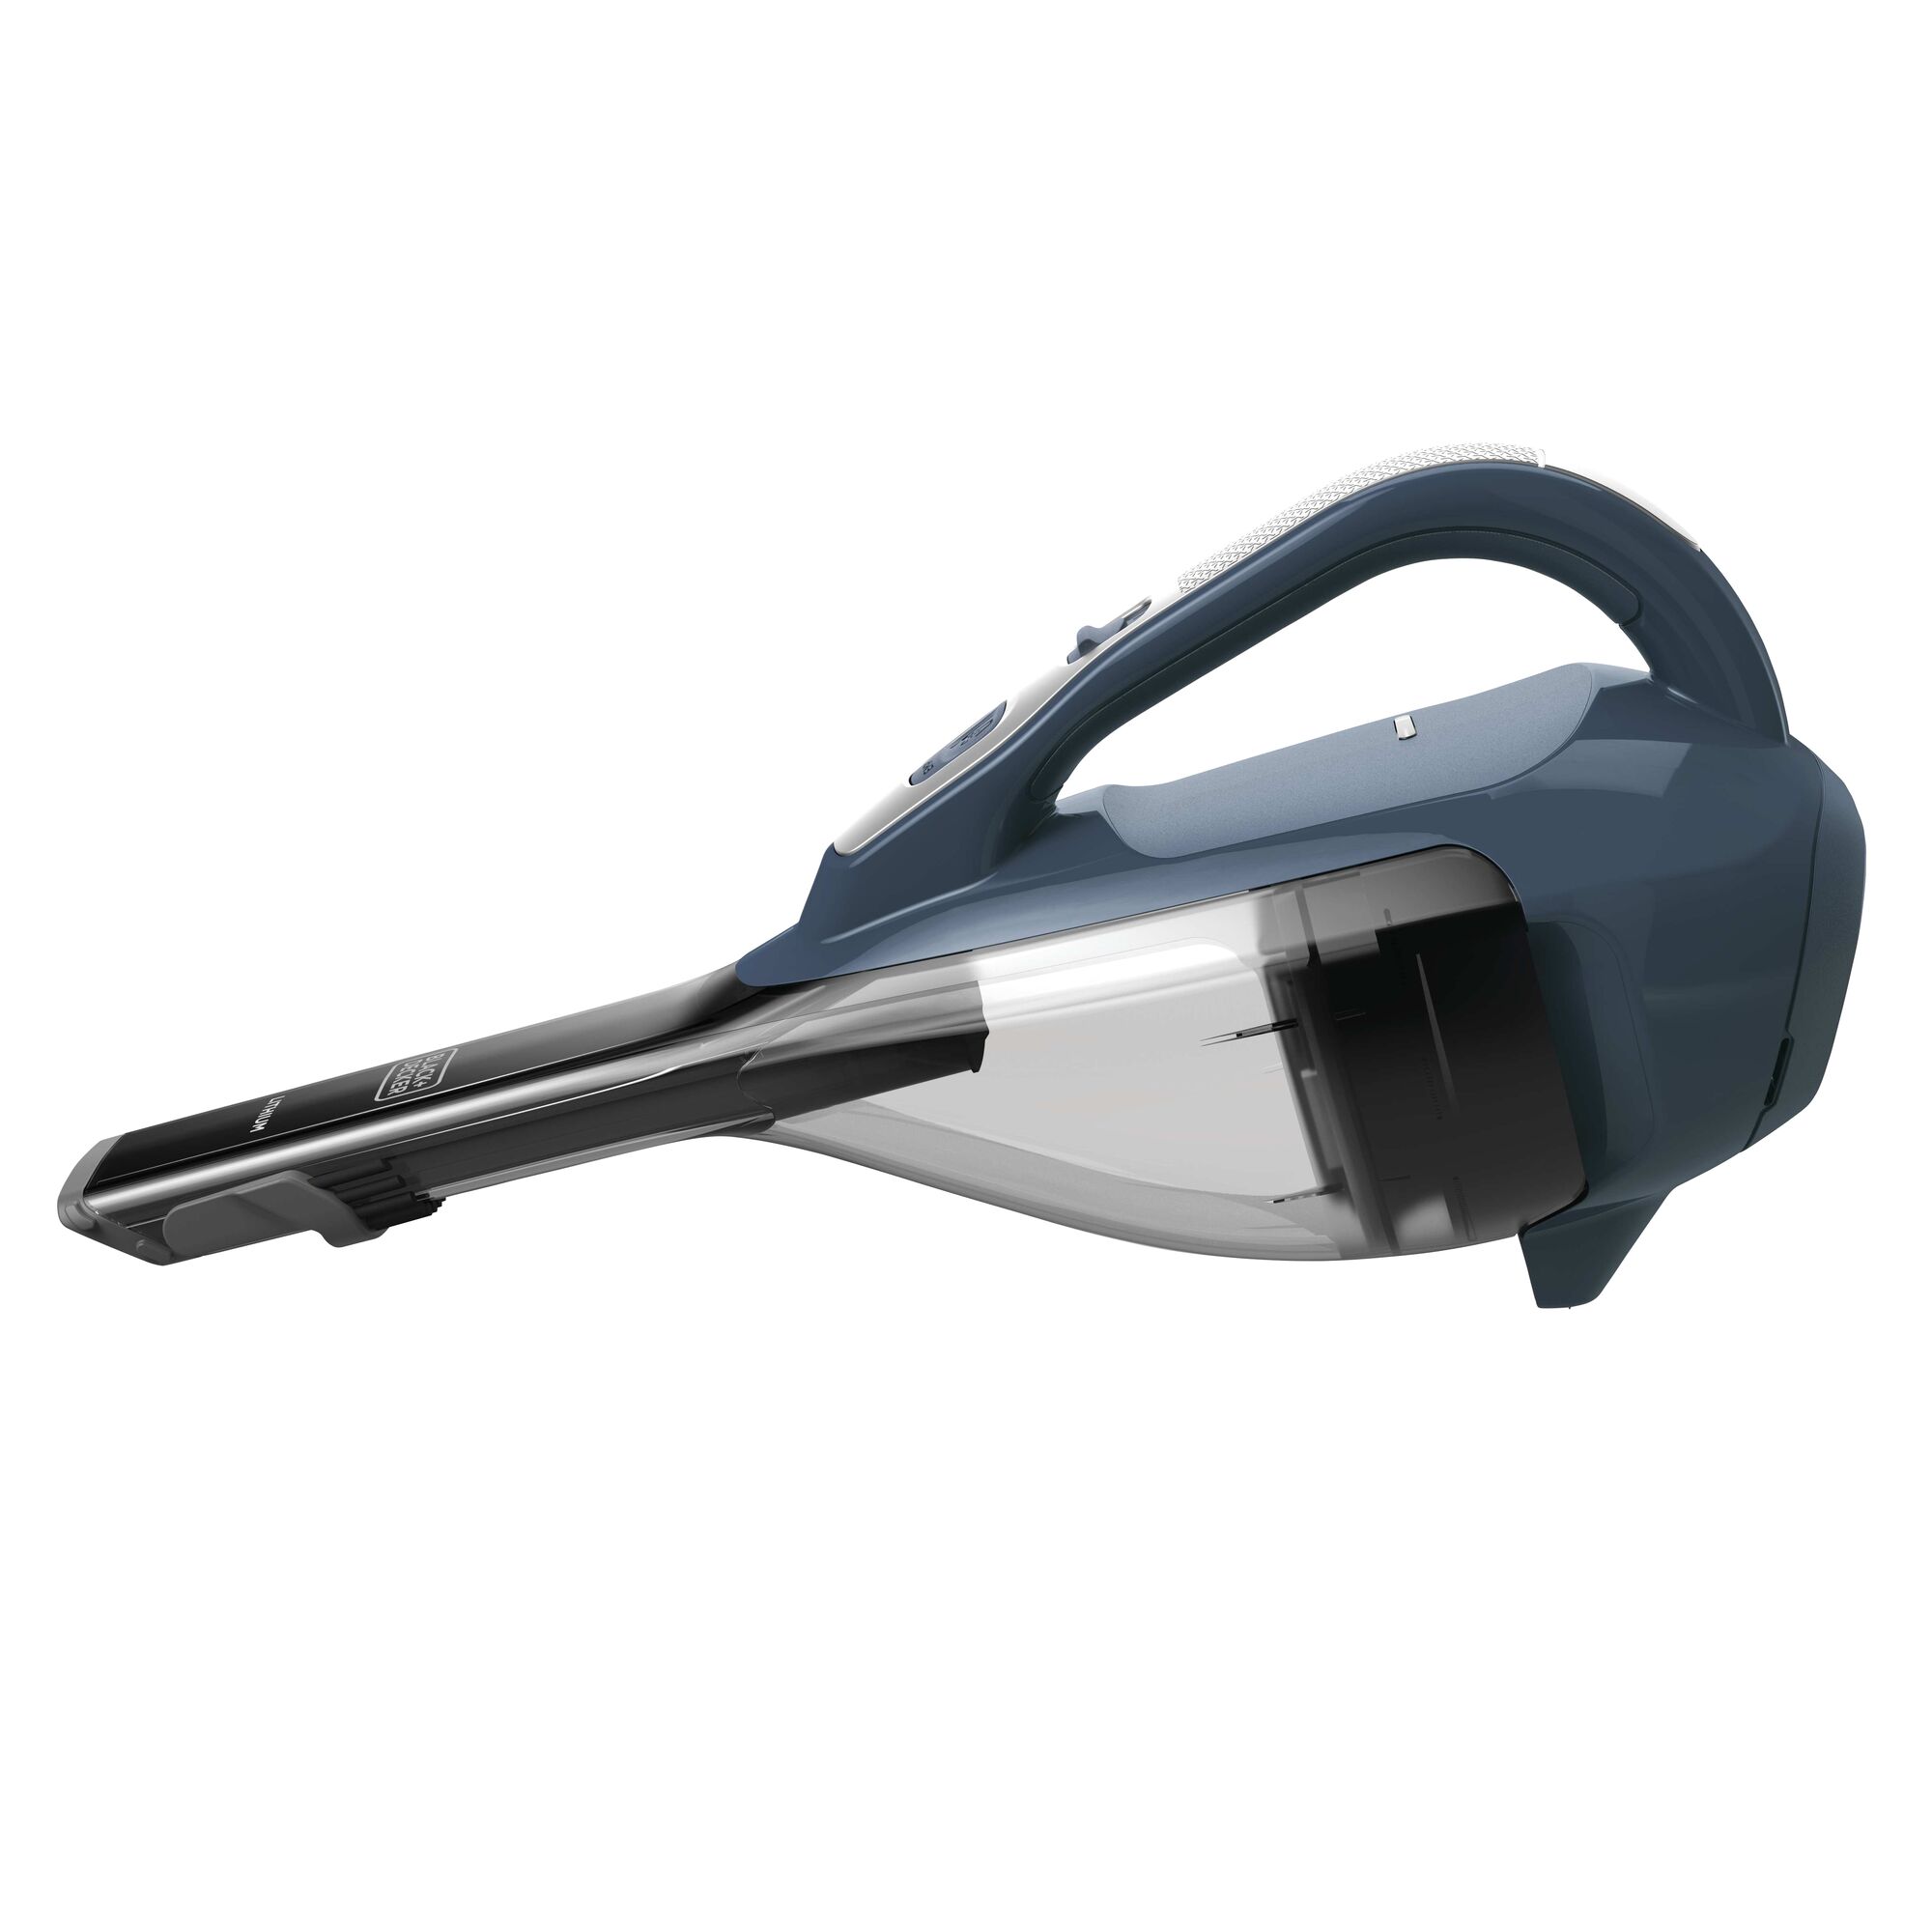 Profile of dustbuster advanced clean cordless hand vacuum.